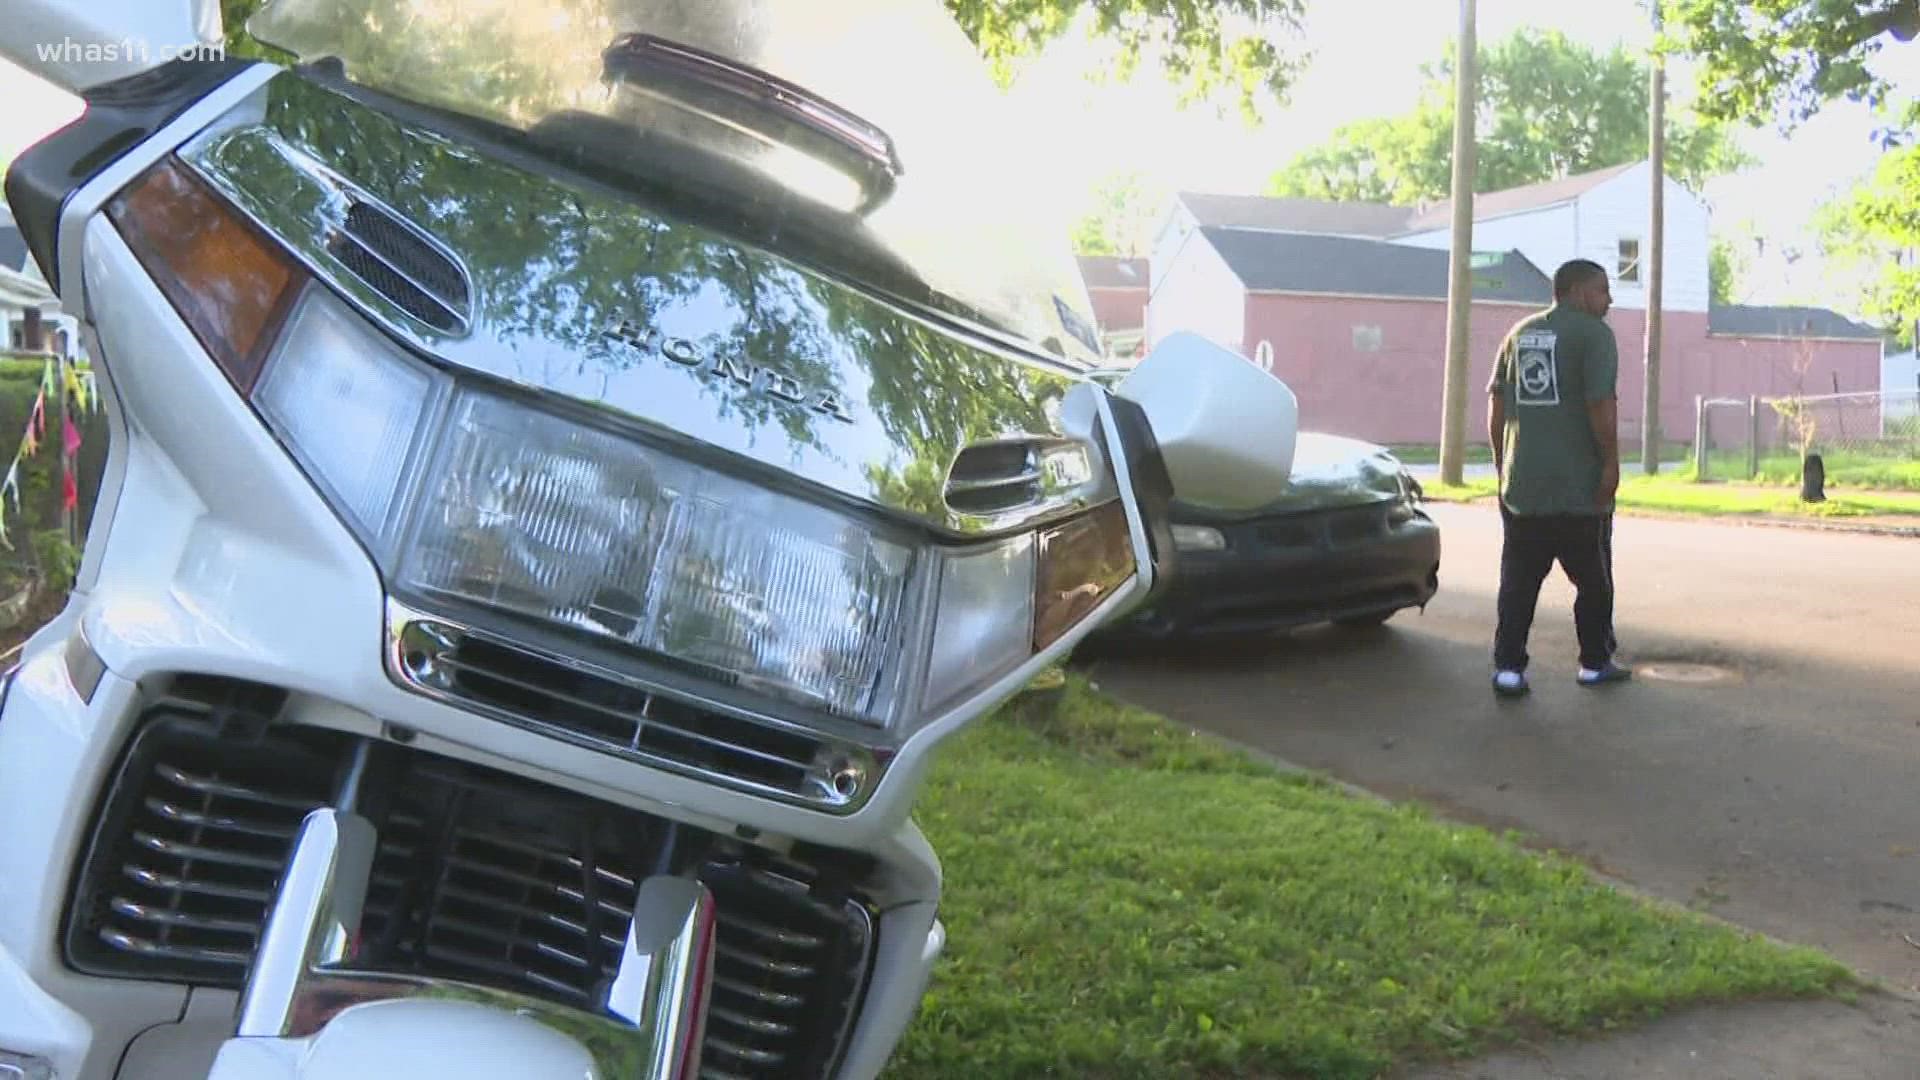 To combat speeders, some Louisville residents are fighting for speed bumps on their streets.